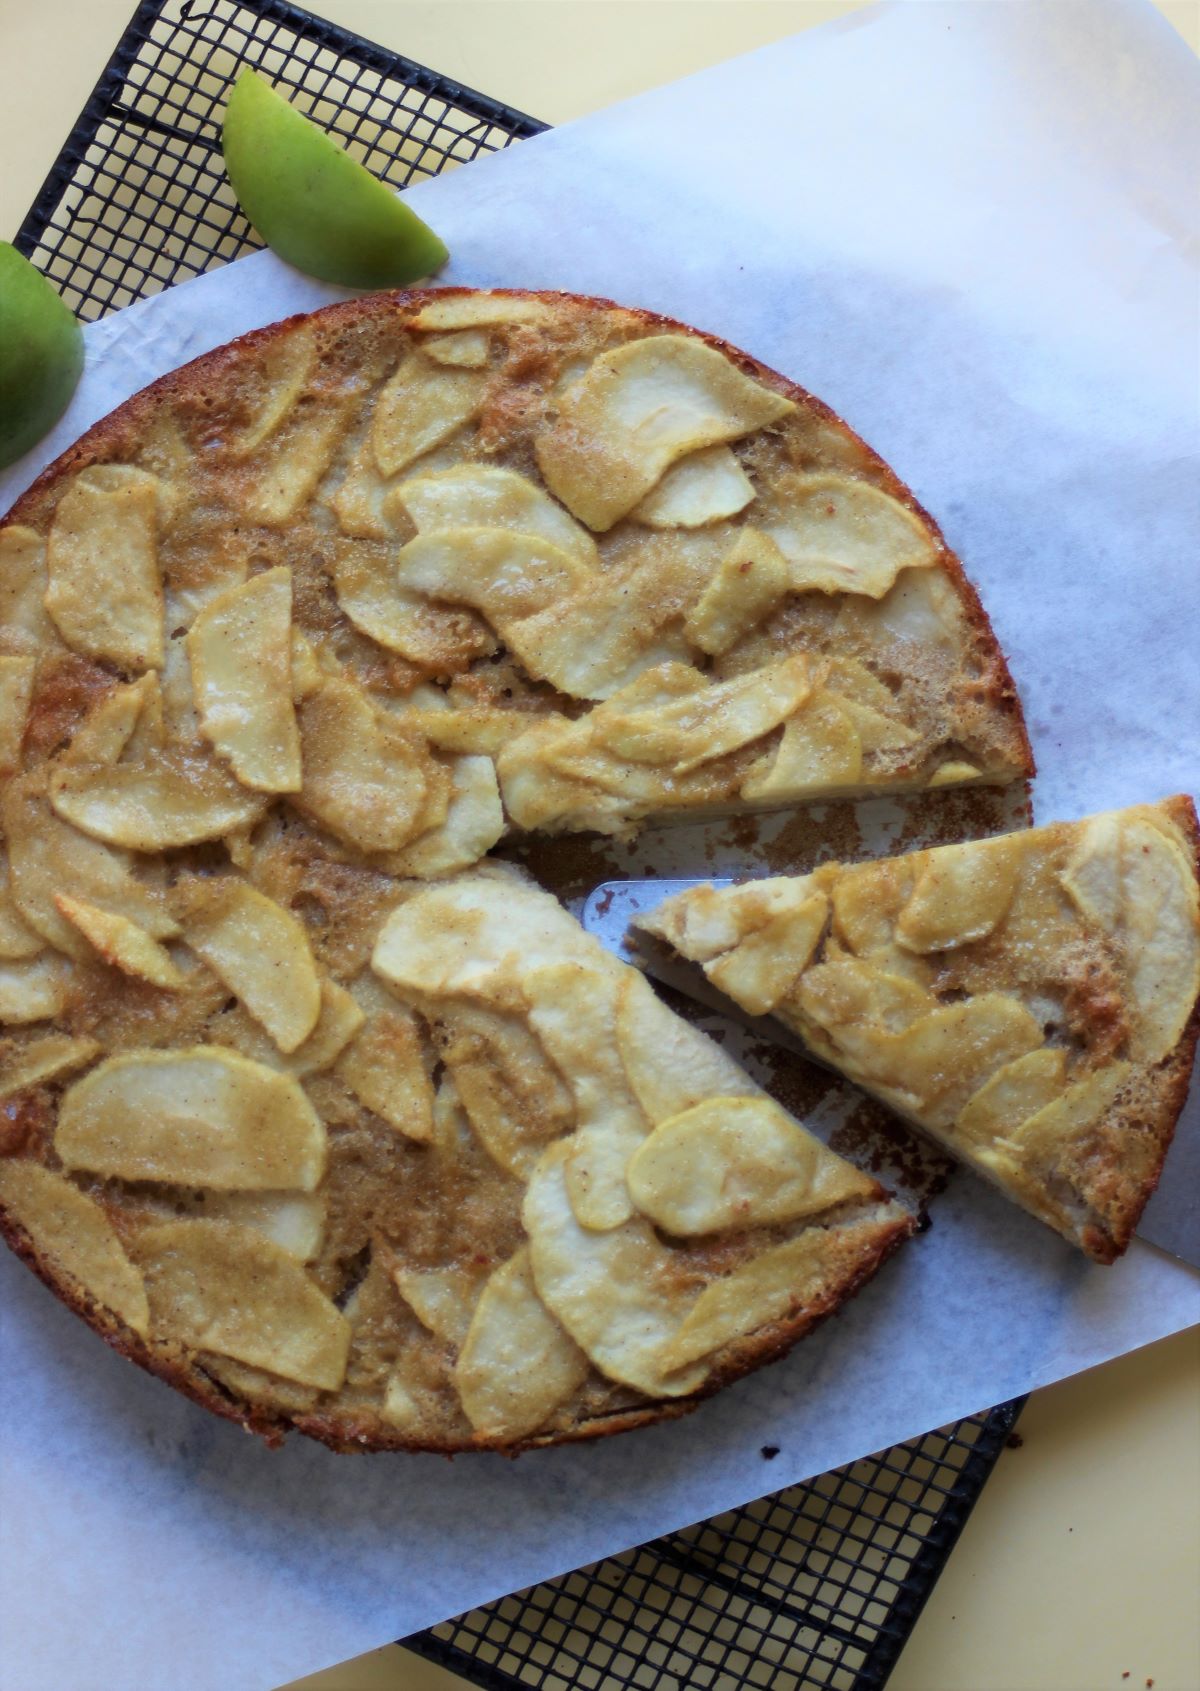 Apple cake on a parchment paper seen from above. A portion coming out of the cake.